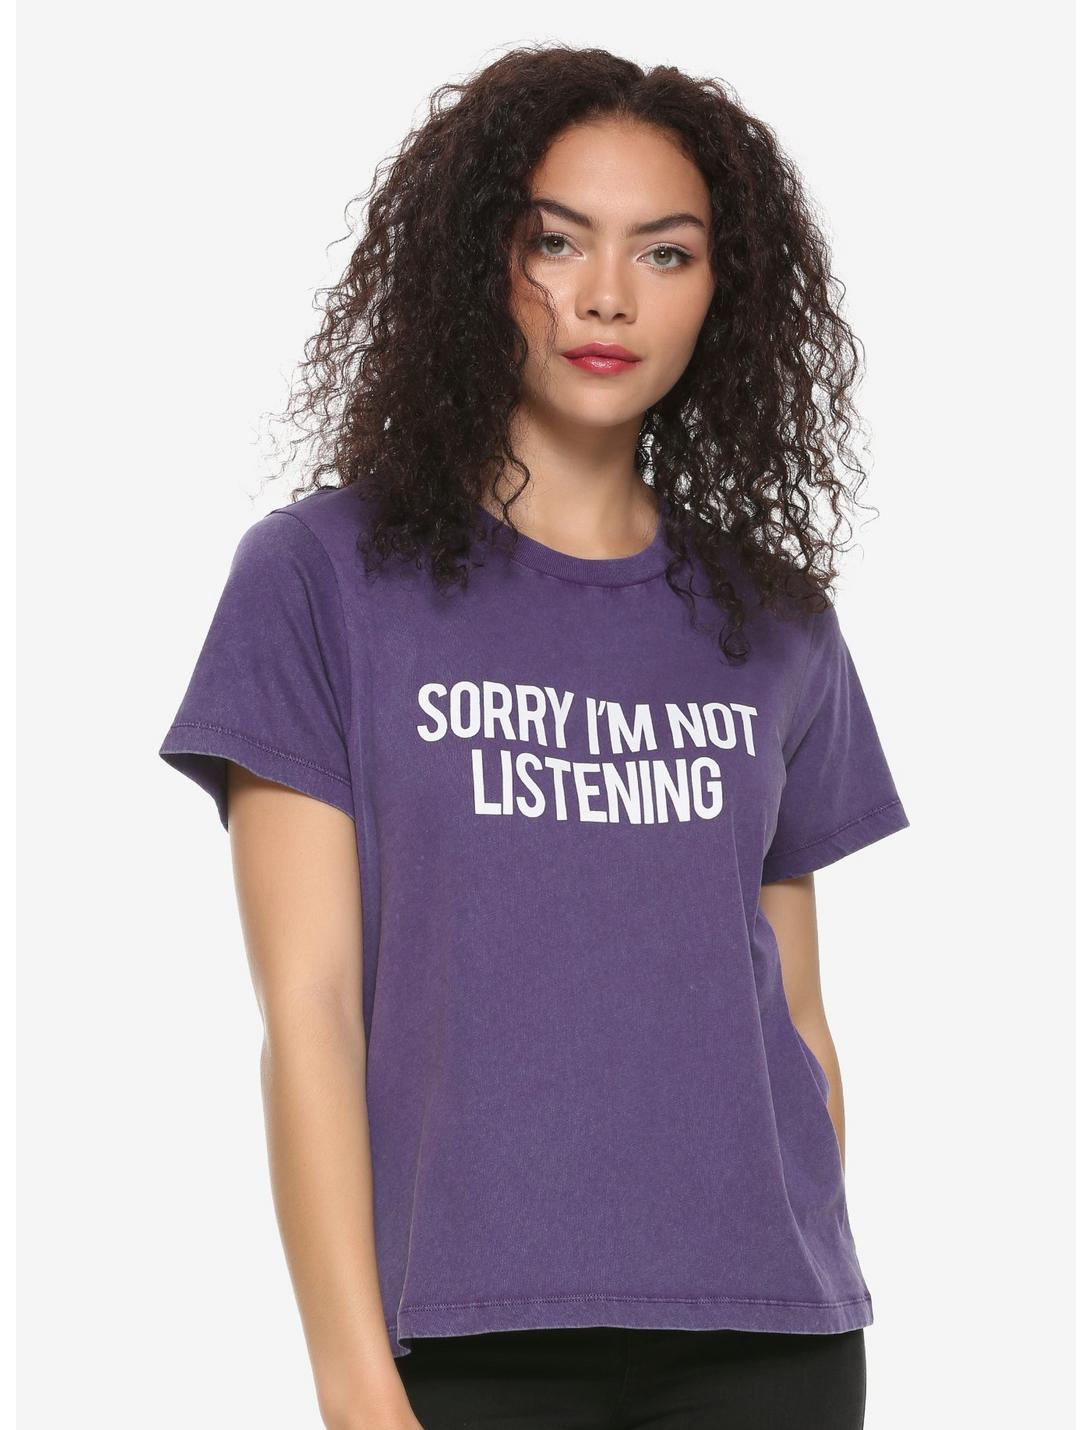 Sorry I'm Not Listening Washed Purple Girls T-Shirt, PURPLE, hi-res